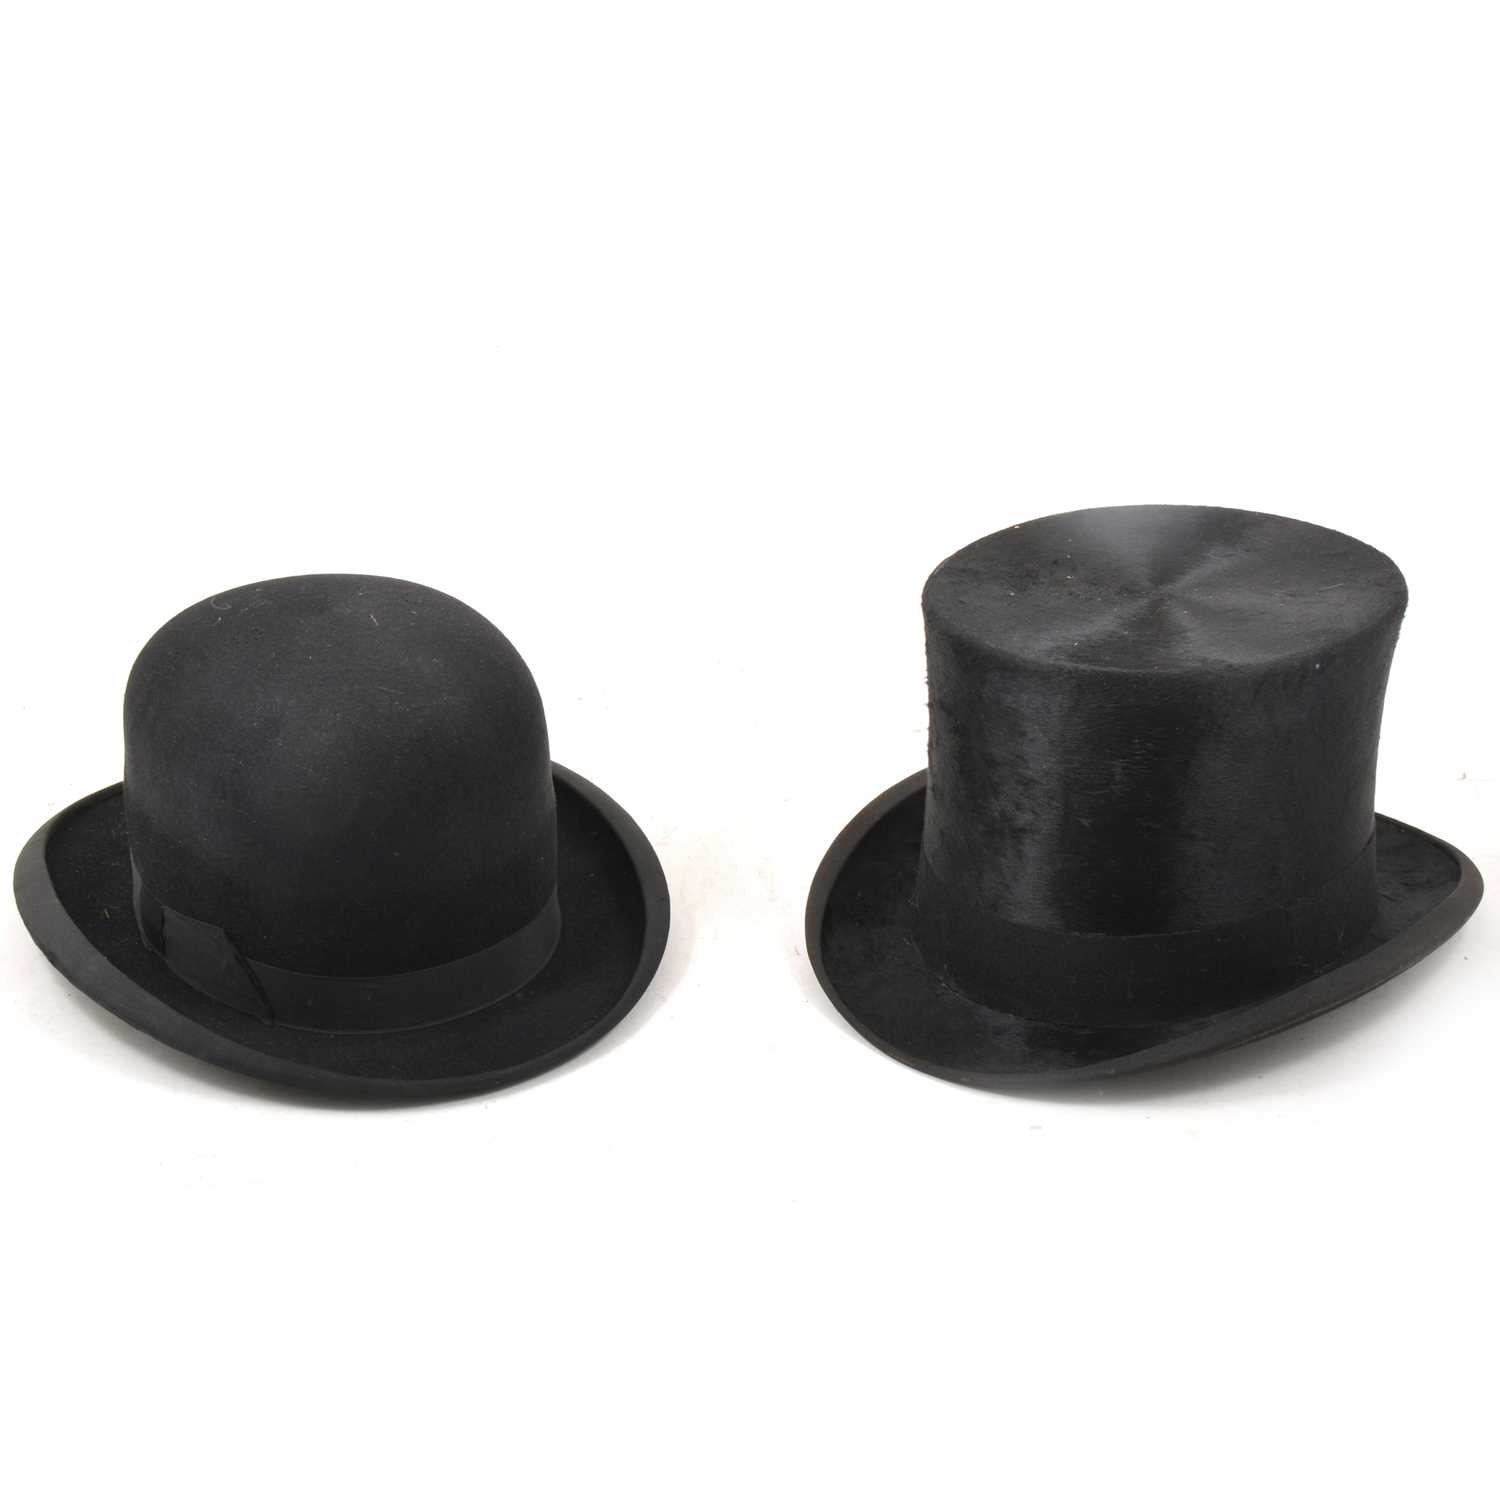 Lot 86 - A Top hat and a Bowler hat.